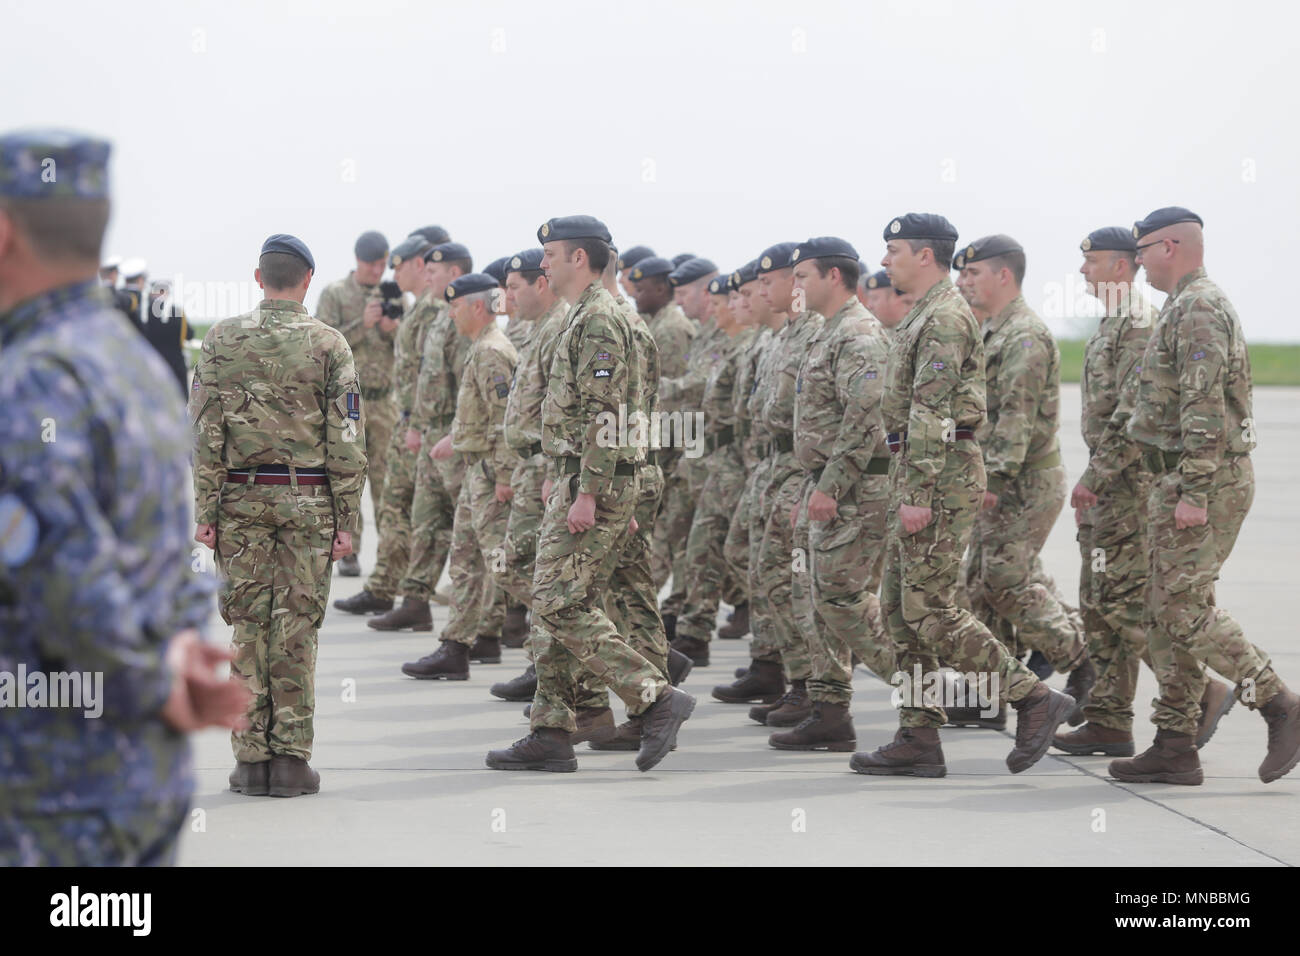 MIHAIL KOGALNICEANU, ROMANIA - APRIL 27, 2018: British Royal Air Force soldiers are attending a ceremony after being deployed in eastern Romania. Stock Photo